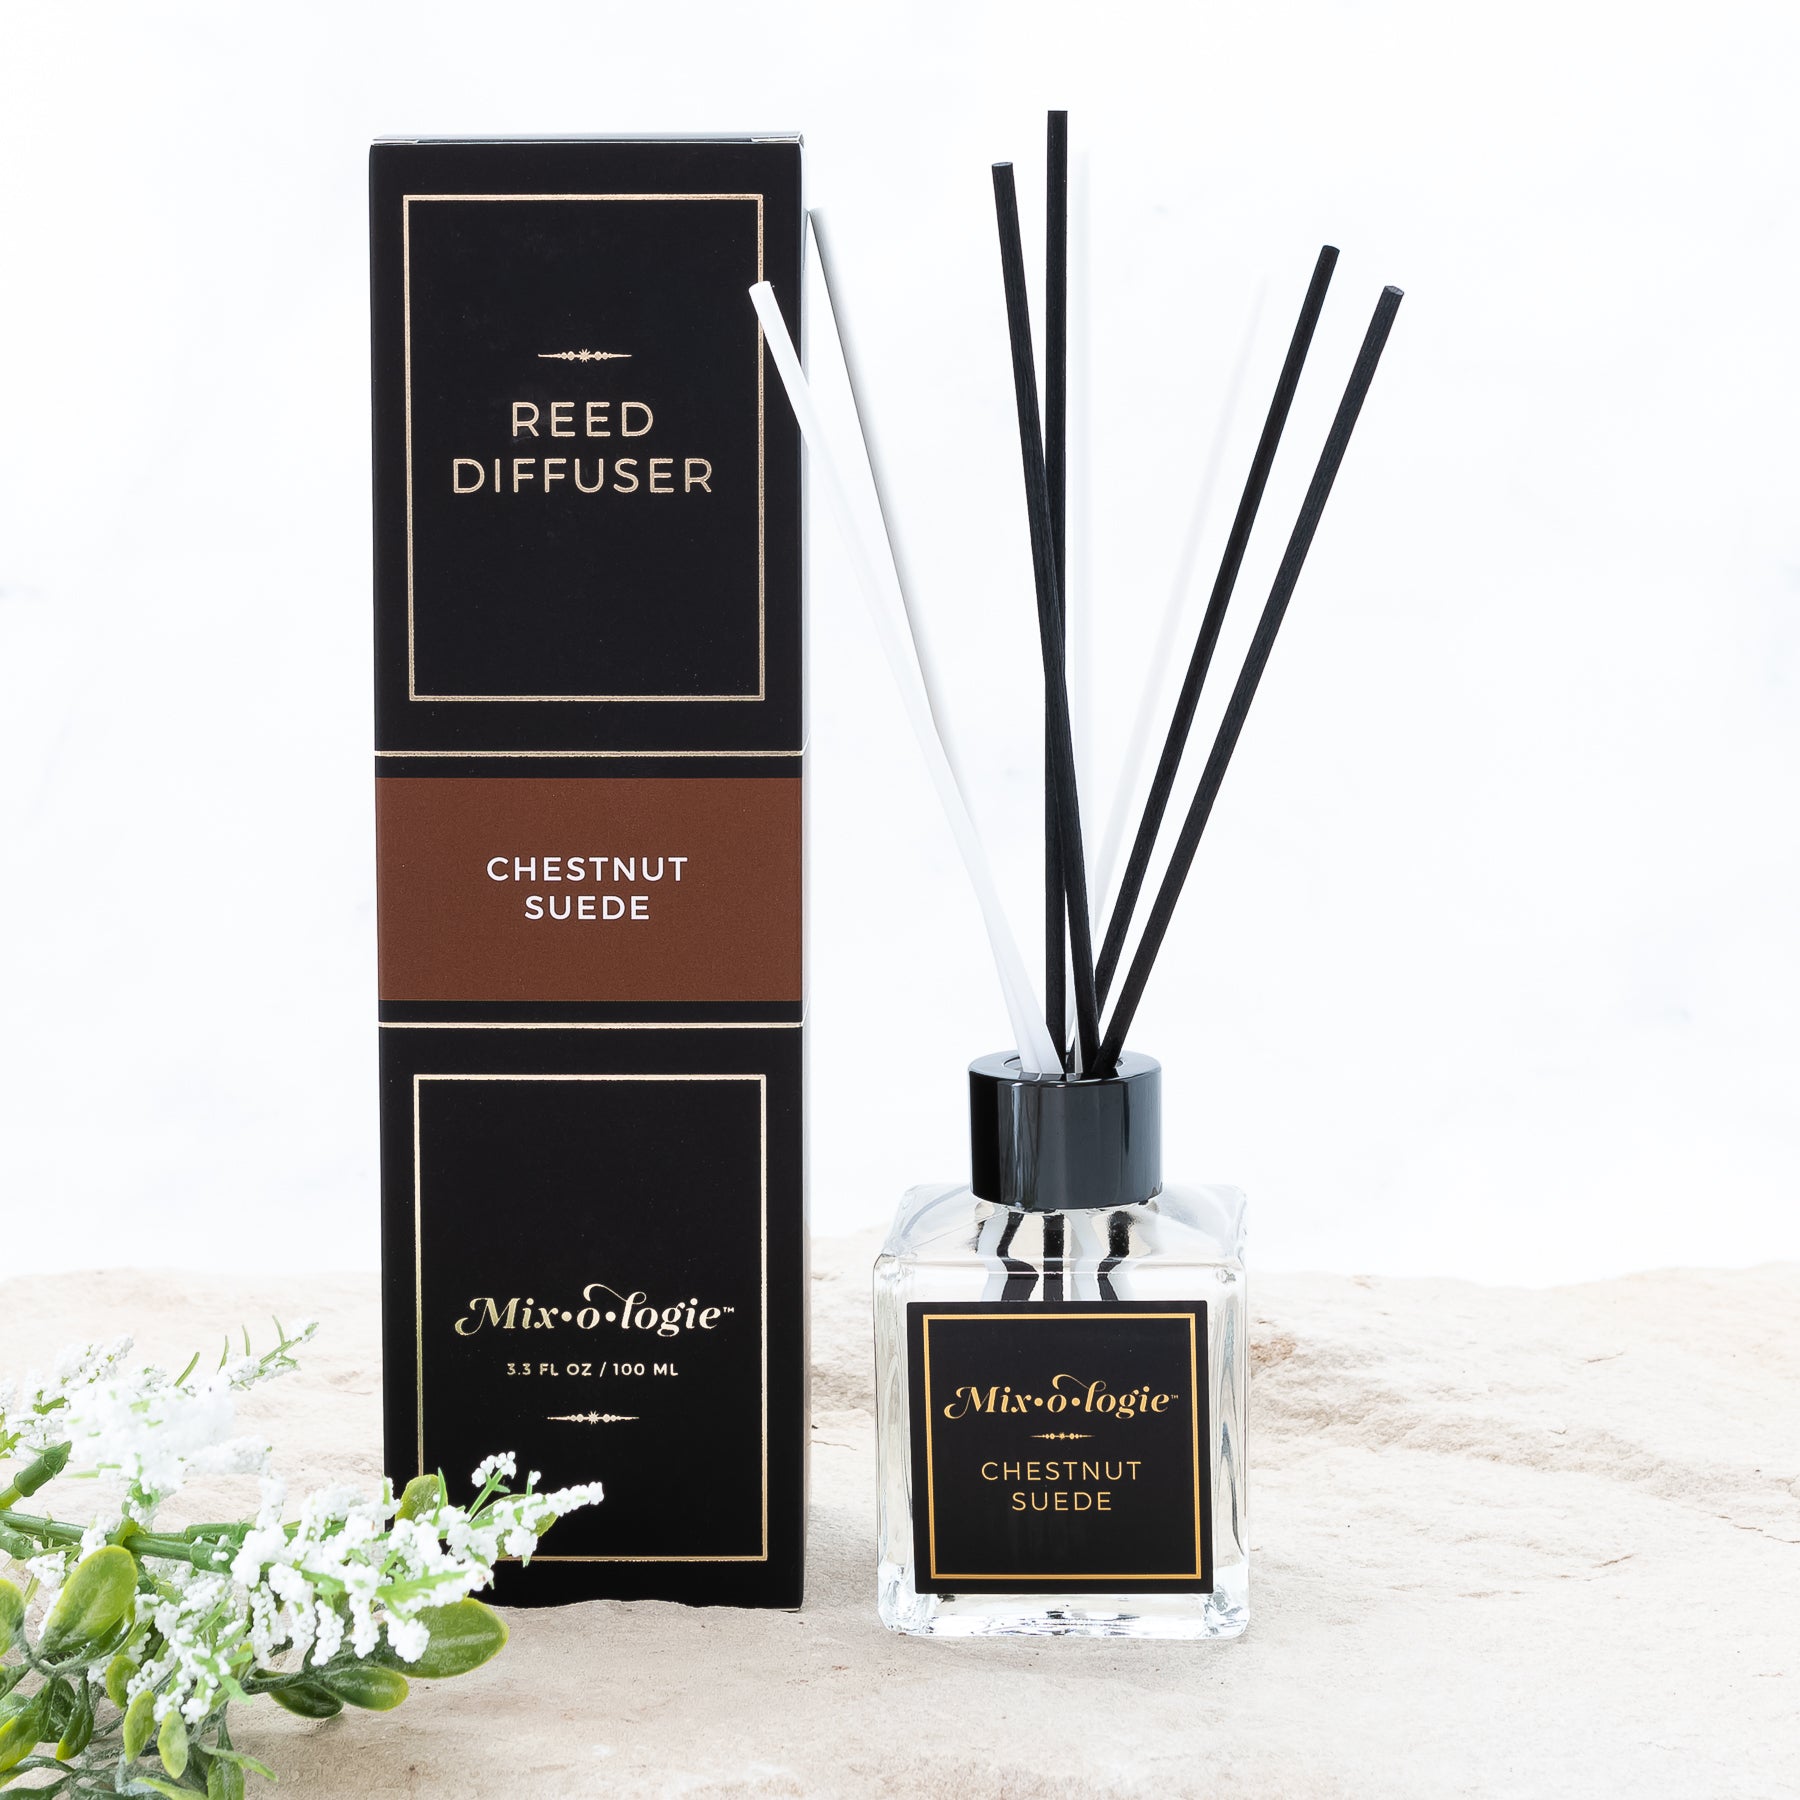 Chestnut Suede Reed Diffuser is a clear square glass container with black label that says Mixologie – Chestnut Suede. Has a black top and 4 white & 4 black reed sticks coming out of top, is 3.3 fl oz or 100 mL of clear scented liquid. Black rectangle package box with brown label. Box and diffuser are pictured with sand and greenery with white flowers.